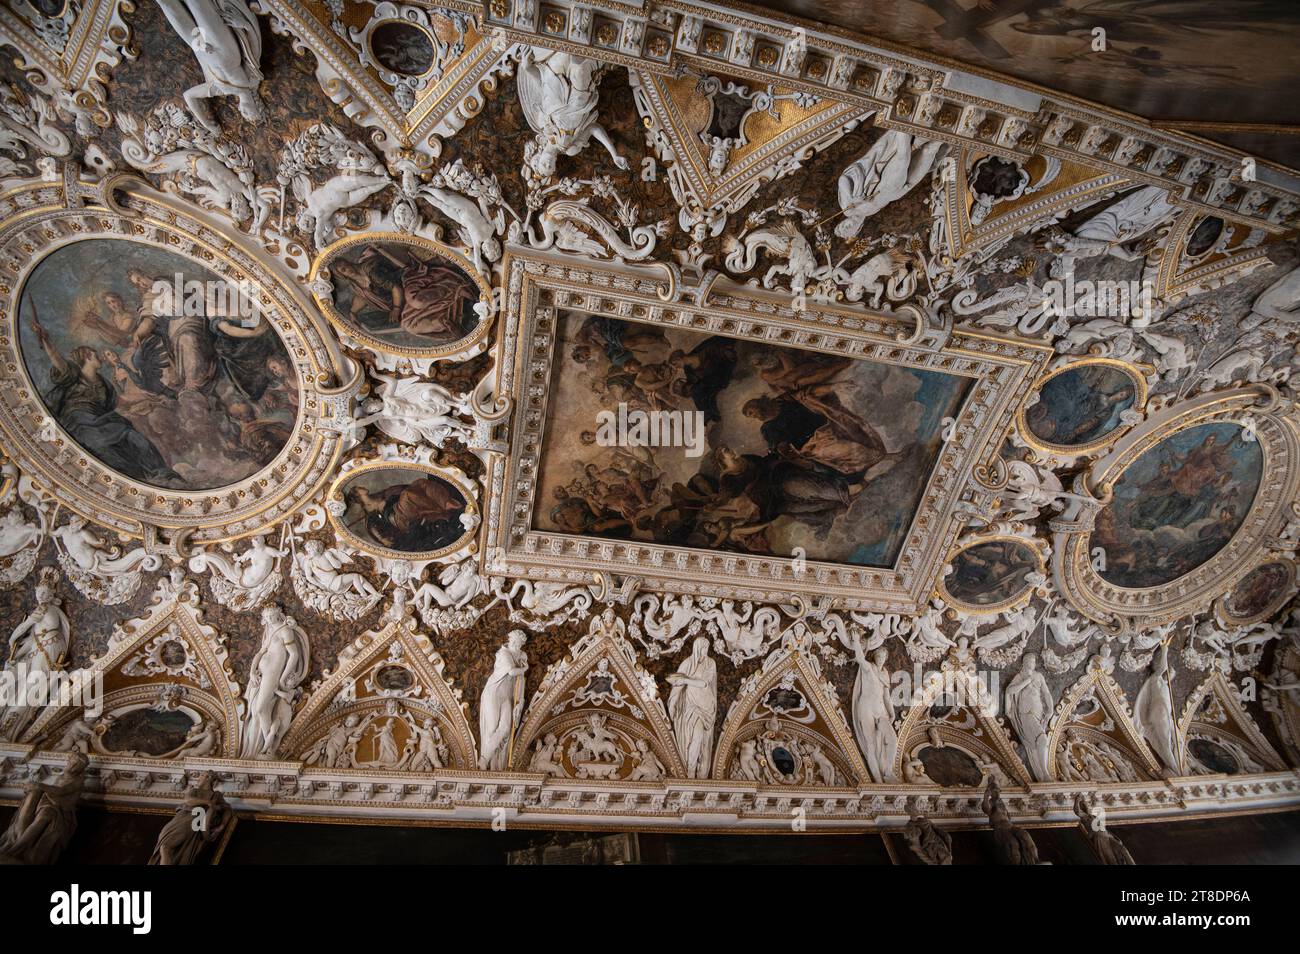 The highly decorated ceiling designed by architect Andrea Palladio with stuccoes and frescoes in the Sala delle Quattro Porte (Hall of the Four Doors) at Stock Photo